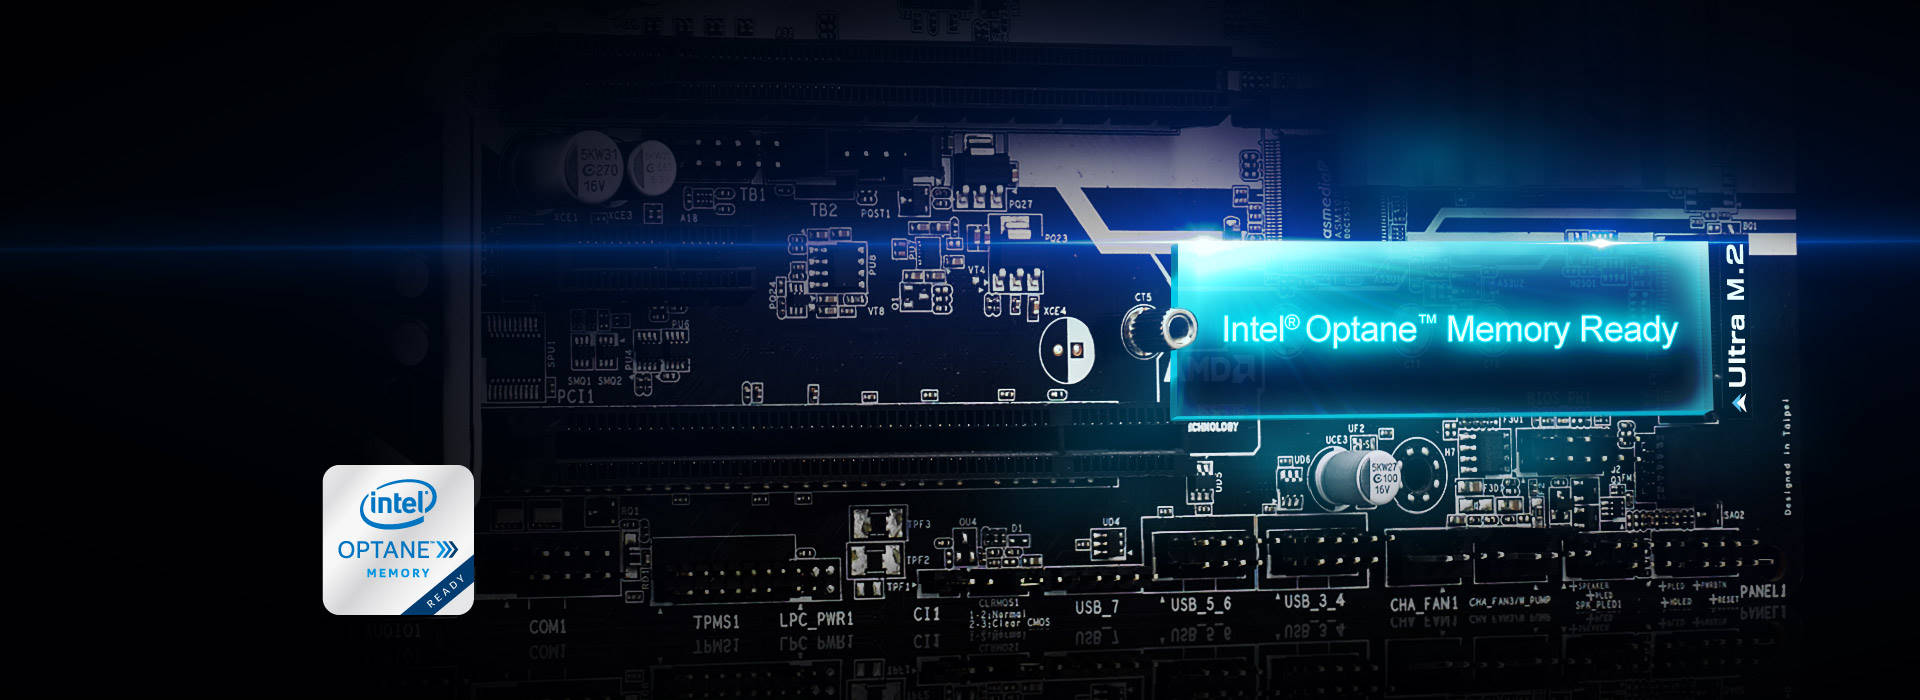 Intel Optane Memory Section Glowing on the Motherboard with its logo to the side